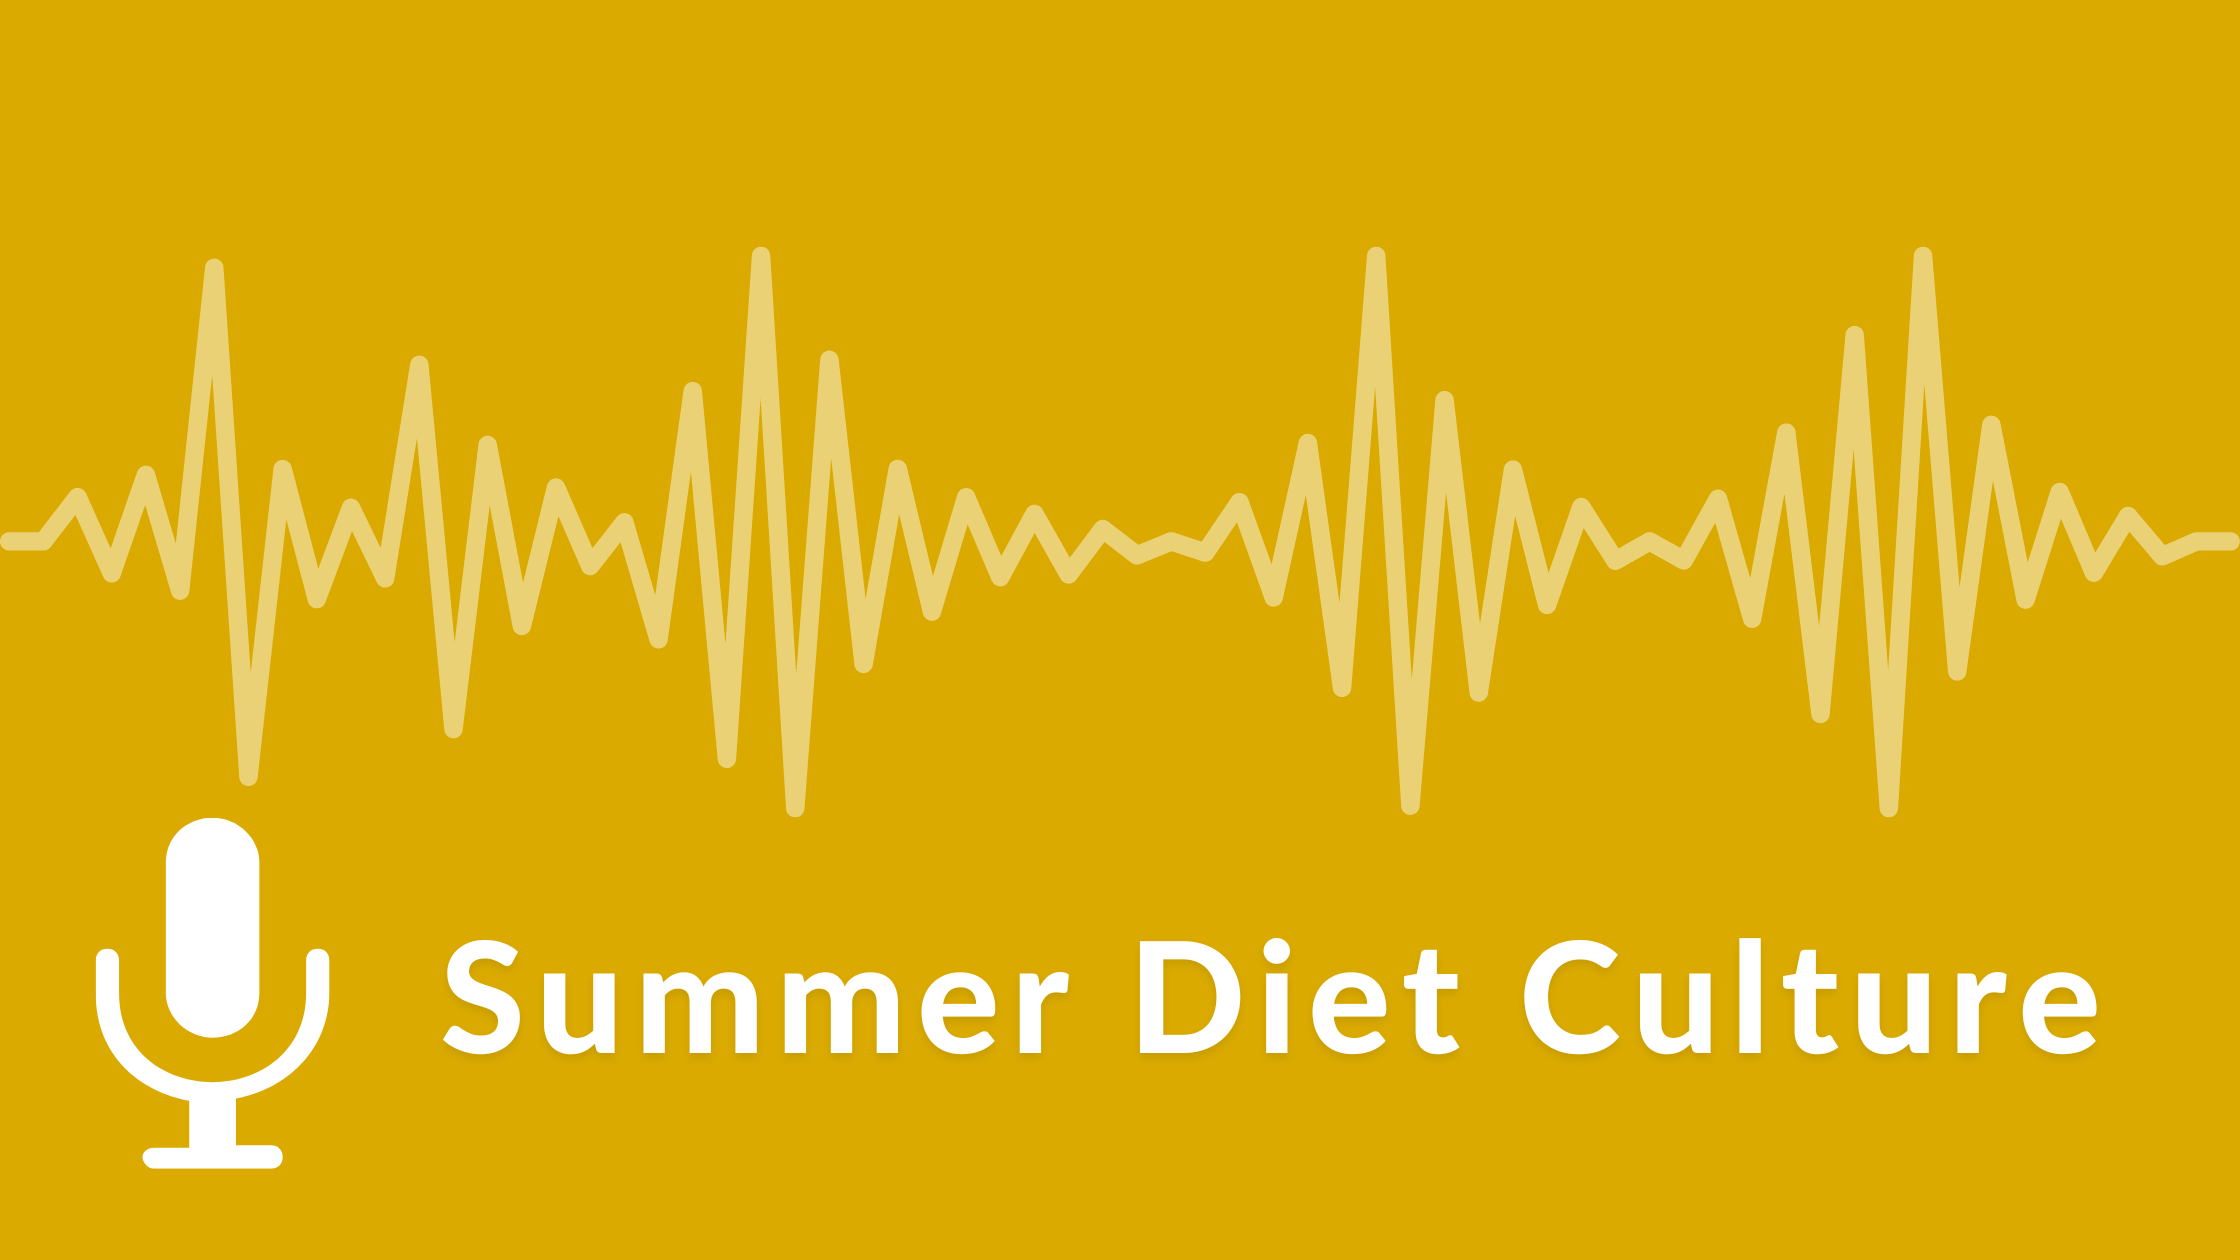 Summer Diet Culture | KNX 97.1 FM News Interview with Alsana’s VP of Clinical Nutrition Services